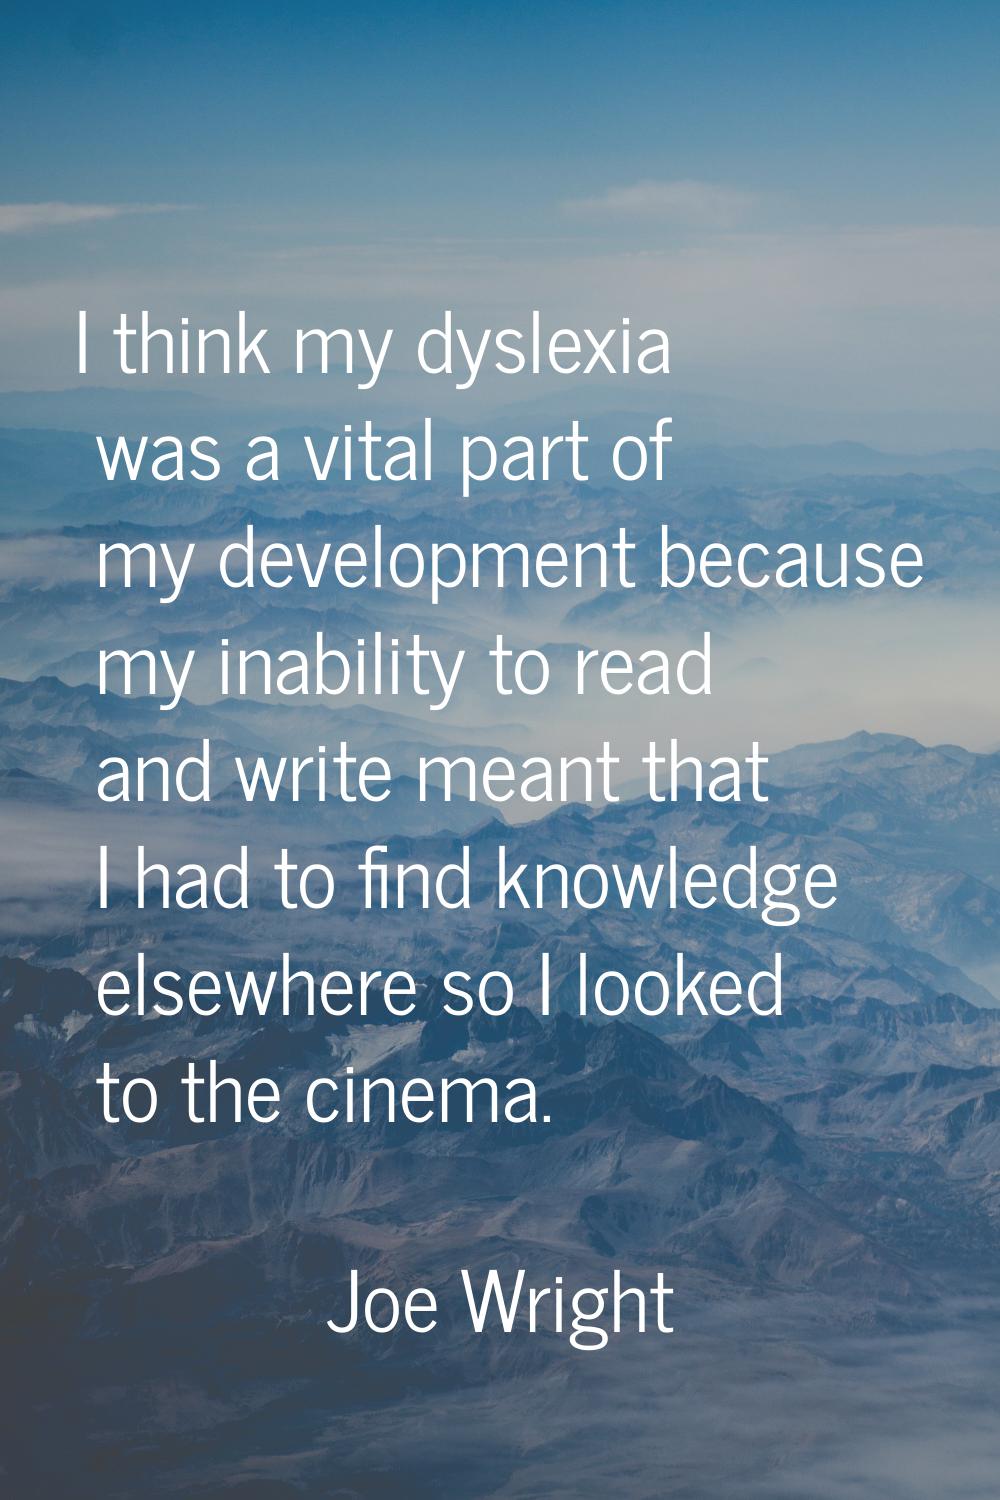 I think my dyslexia was a vital part of my development because my inability to read and write meant